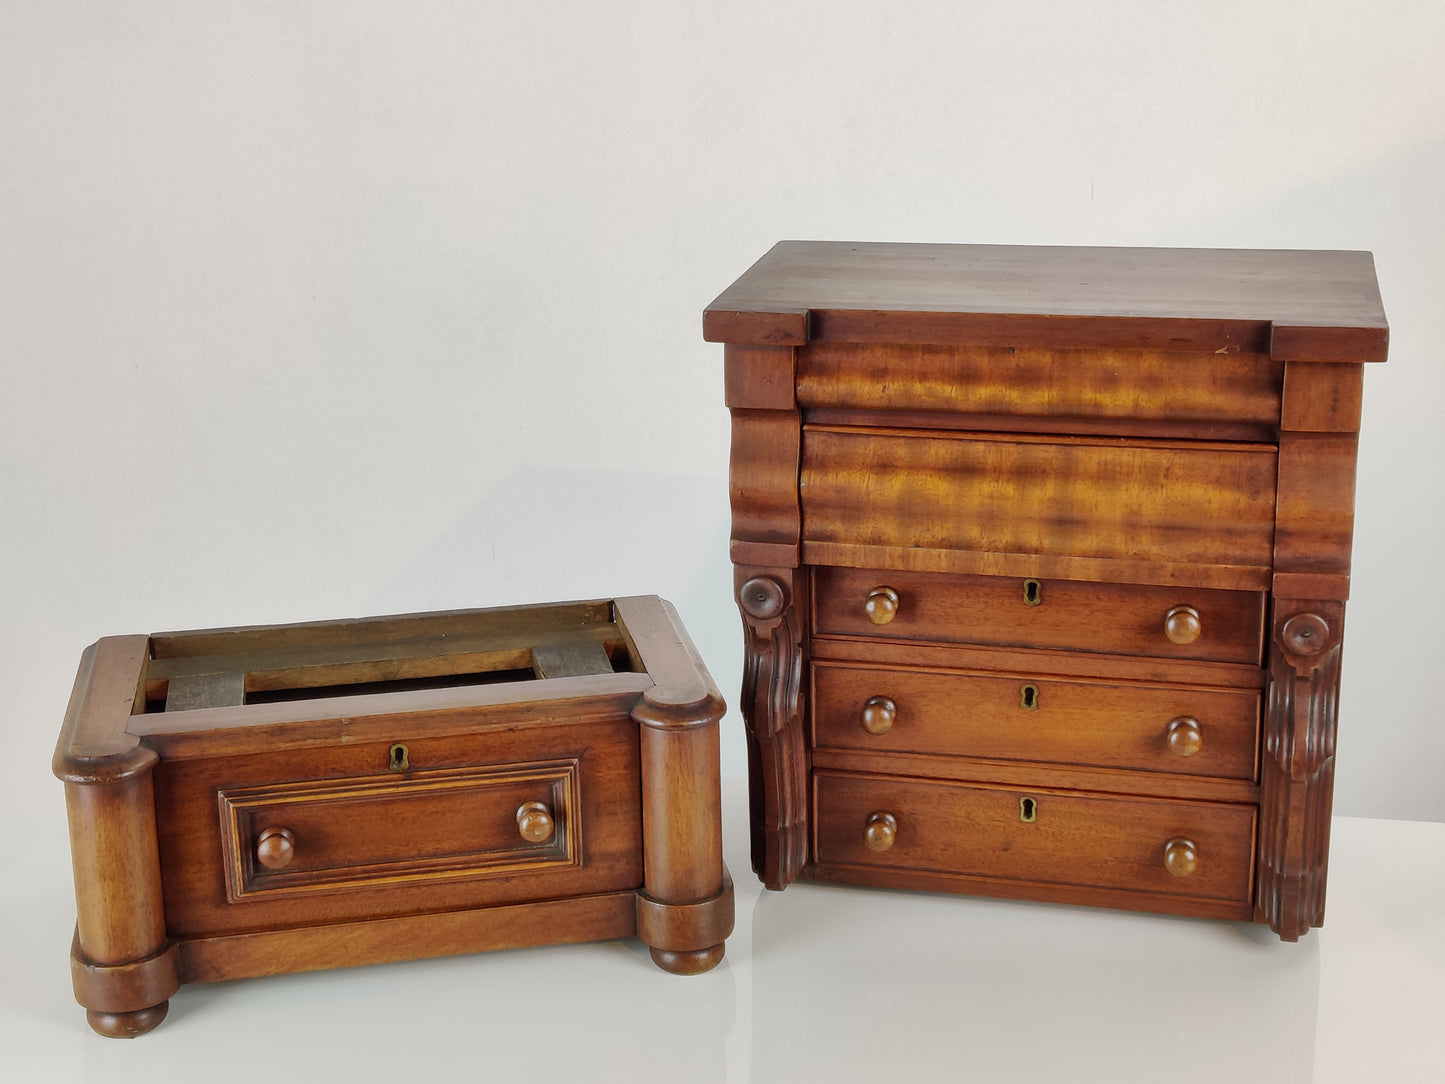 Apprentice - Miniature Chest of Drawers